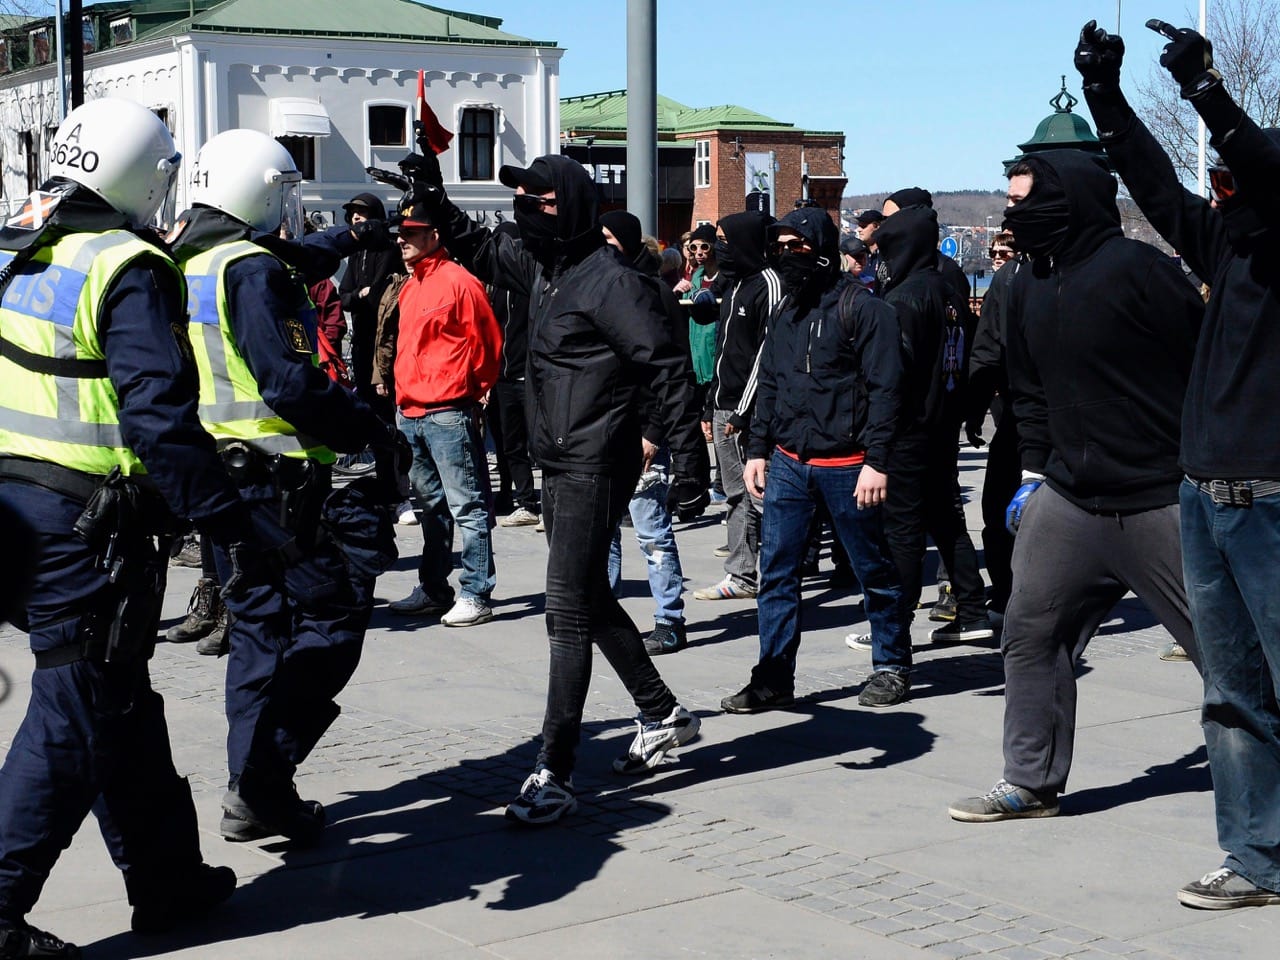 Police separate protesters during a May Day demonstration organised by a nationalist political party in Jonkoping, 1 May 2013, REUTERS/Mikael Fritzon/Scanpix Sweden